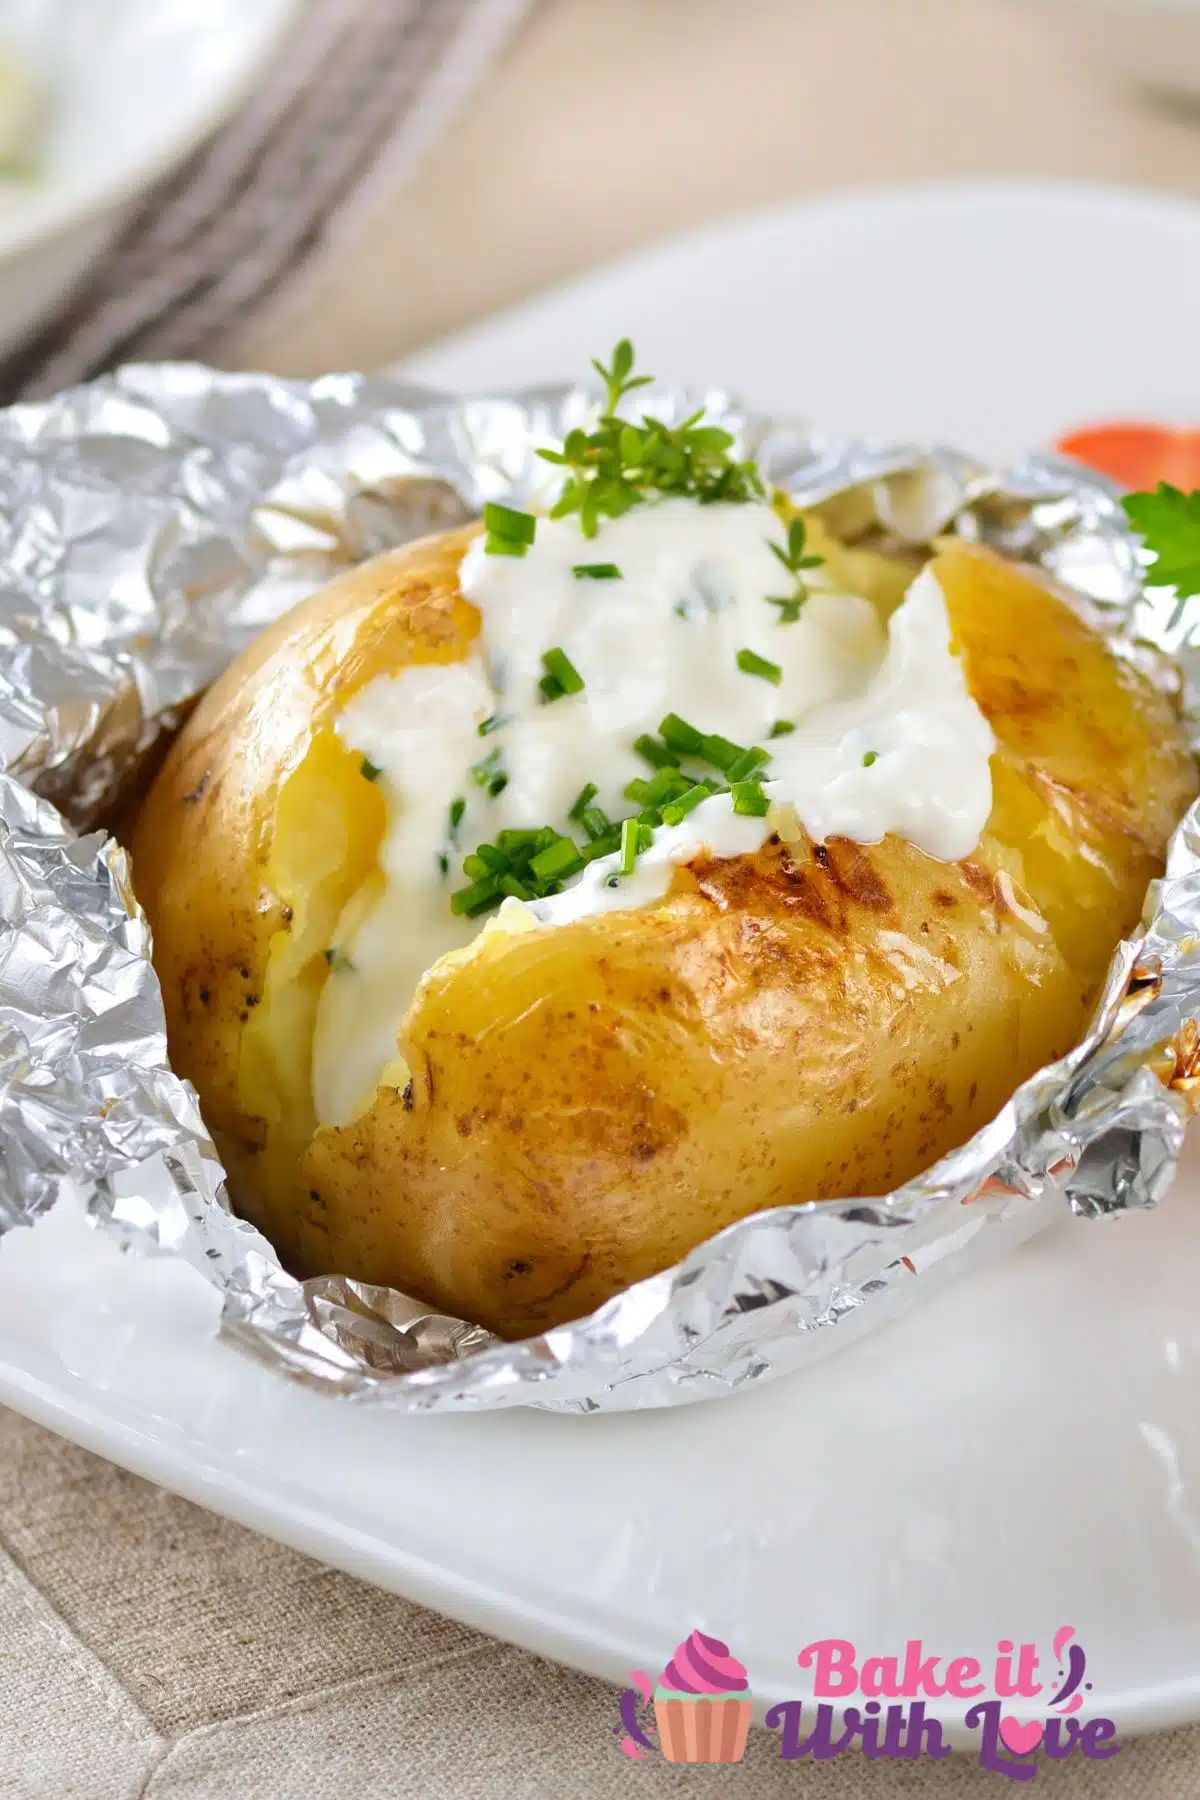 Tall image showing a baked potato on a white plate, with sour cream and chives.